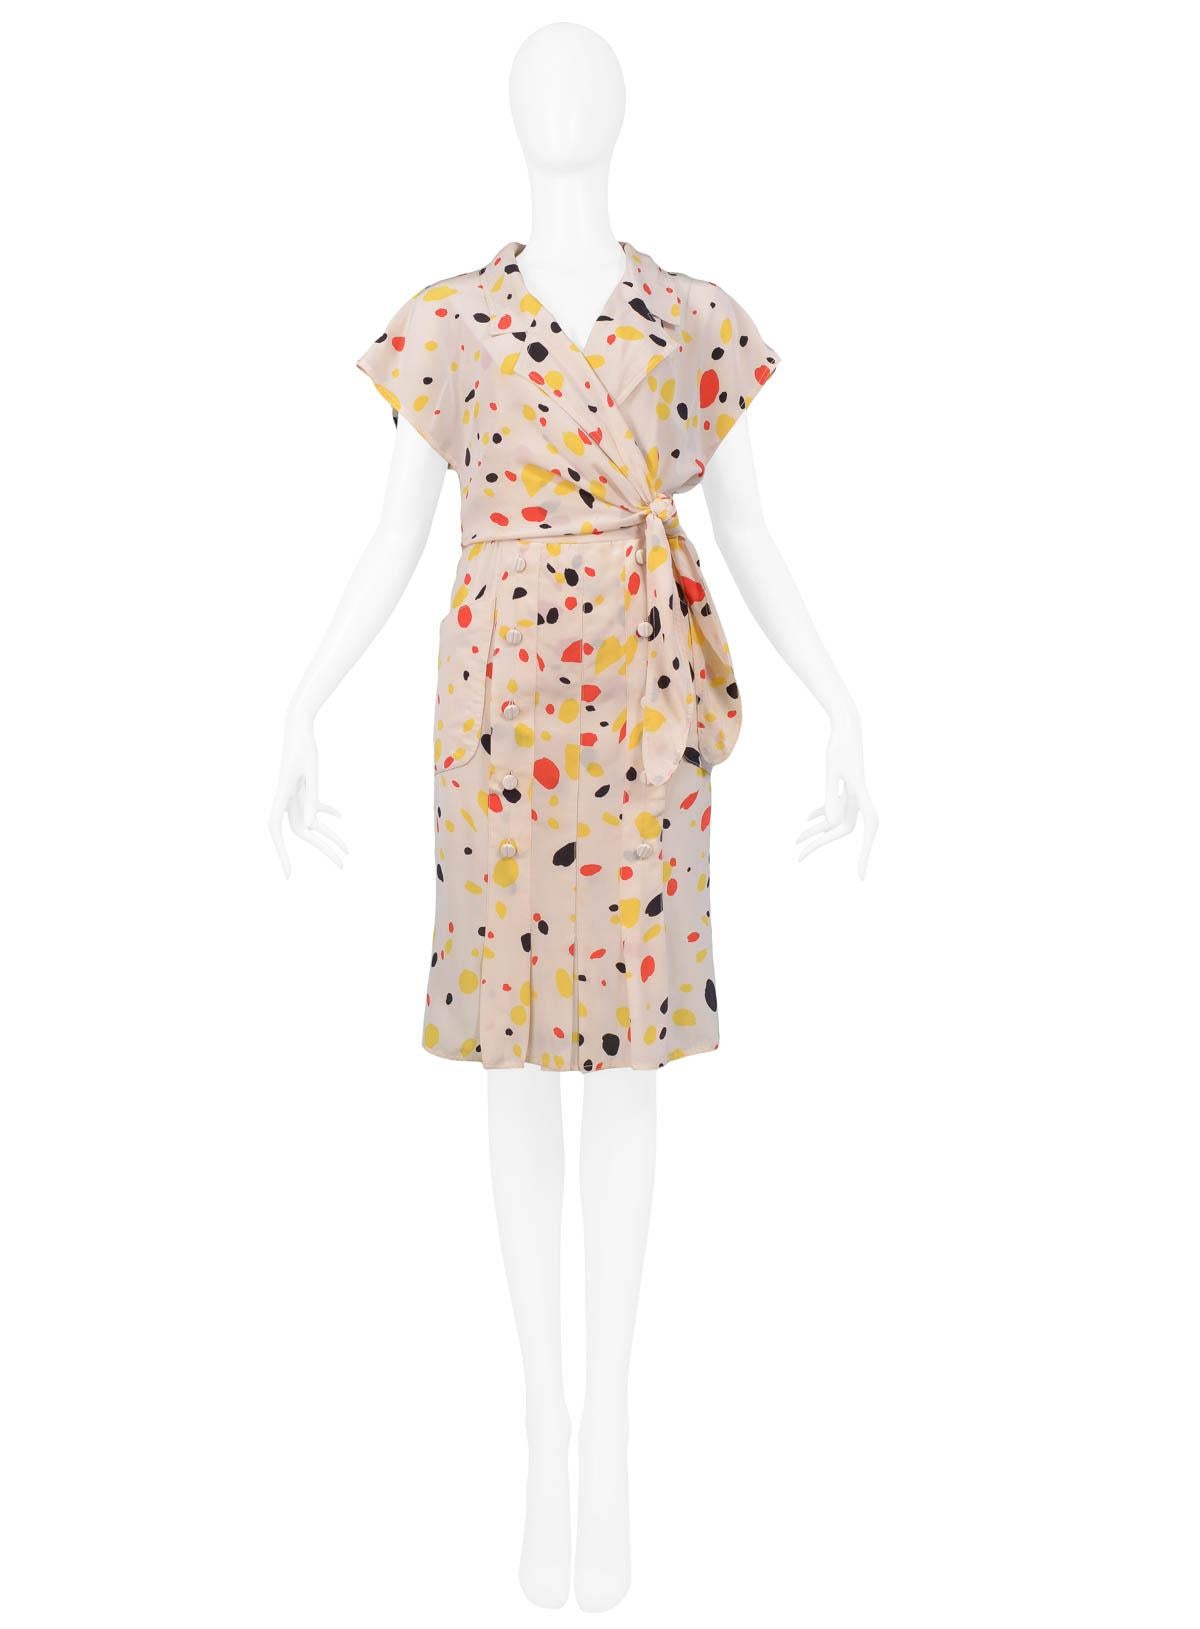 Vintage Chloe silk dress with yellow, black, and red abstract polka dot print. This dress features a wrap-style top and pleated skirt with side pockets and double button detail on front.

Excellent Vintage Condition

Size: No Size Label. Will fit a